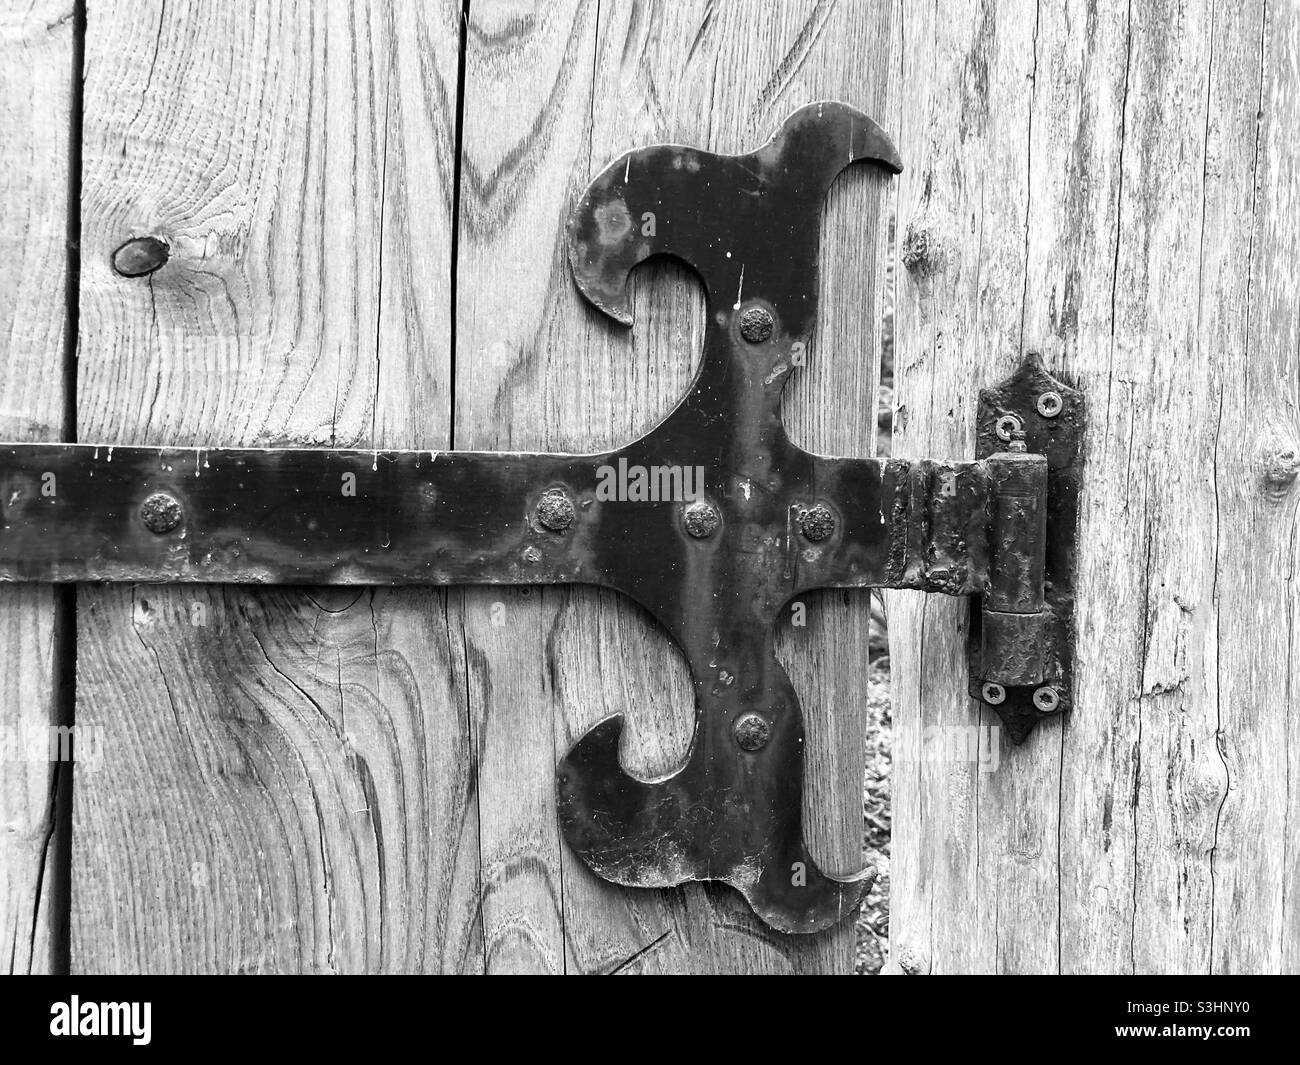 Fitting of a wooden Gate Stock Photo